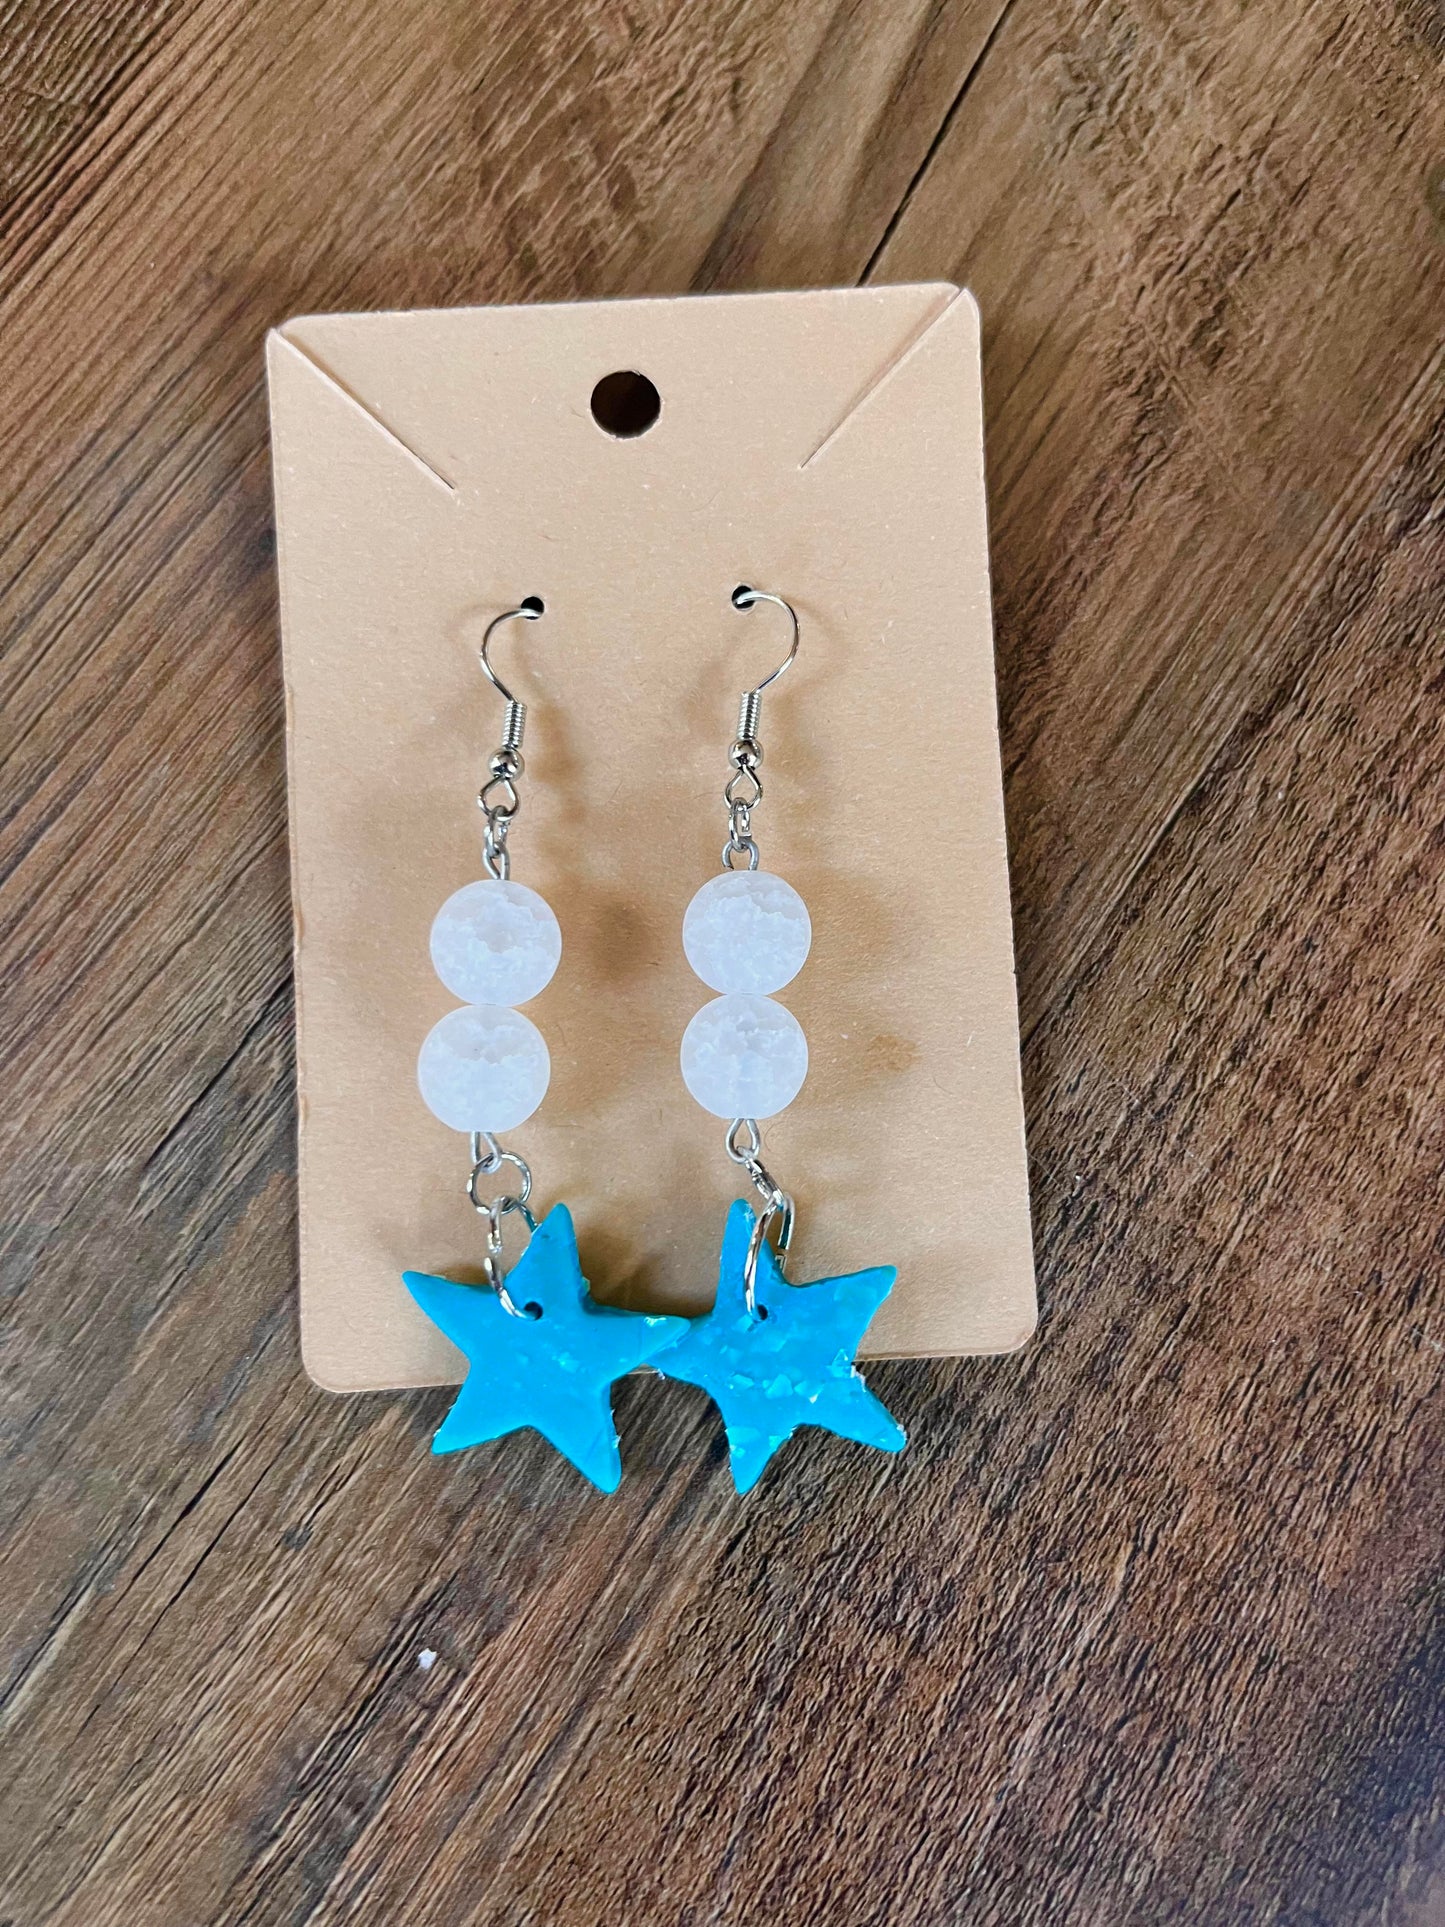 Clay Earrings in "Turquoise Shimmer" Design